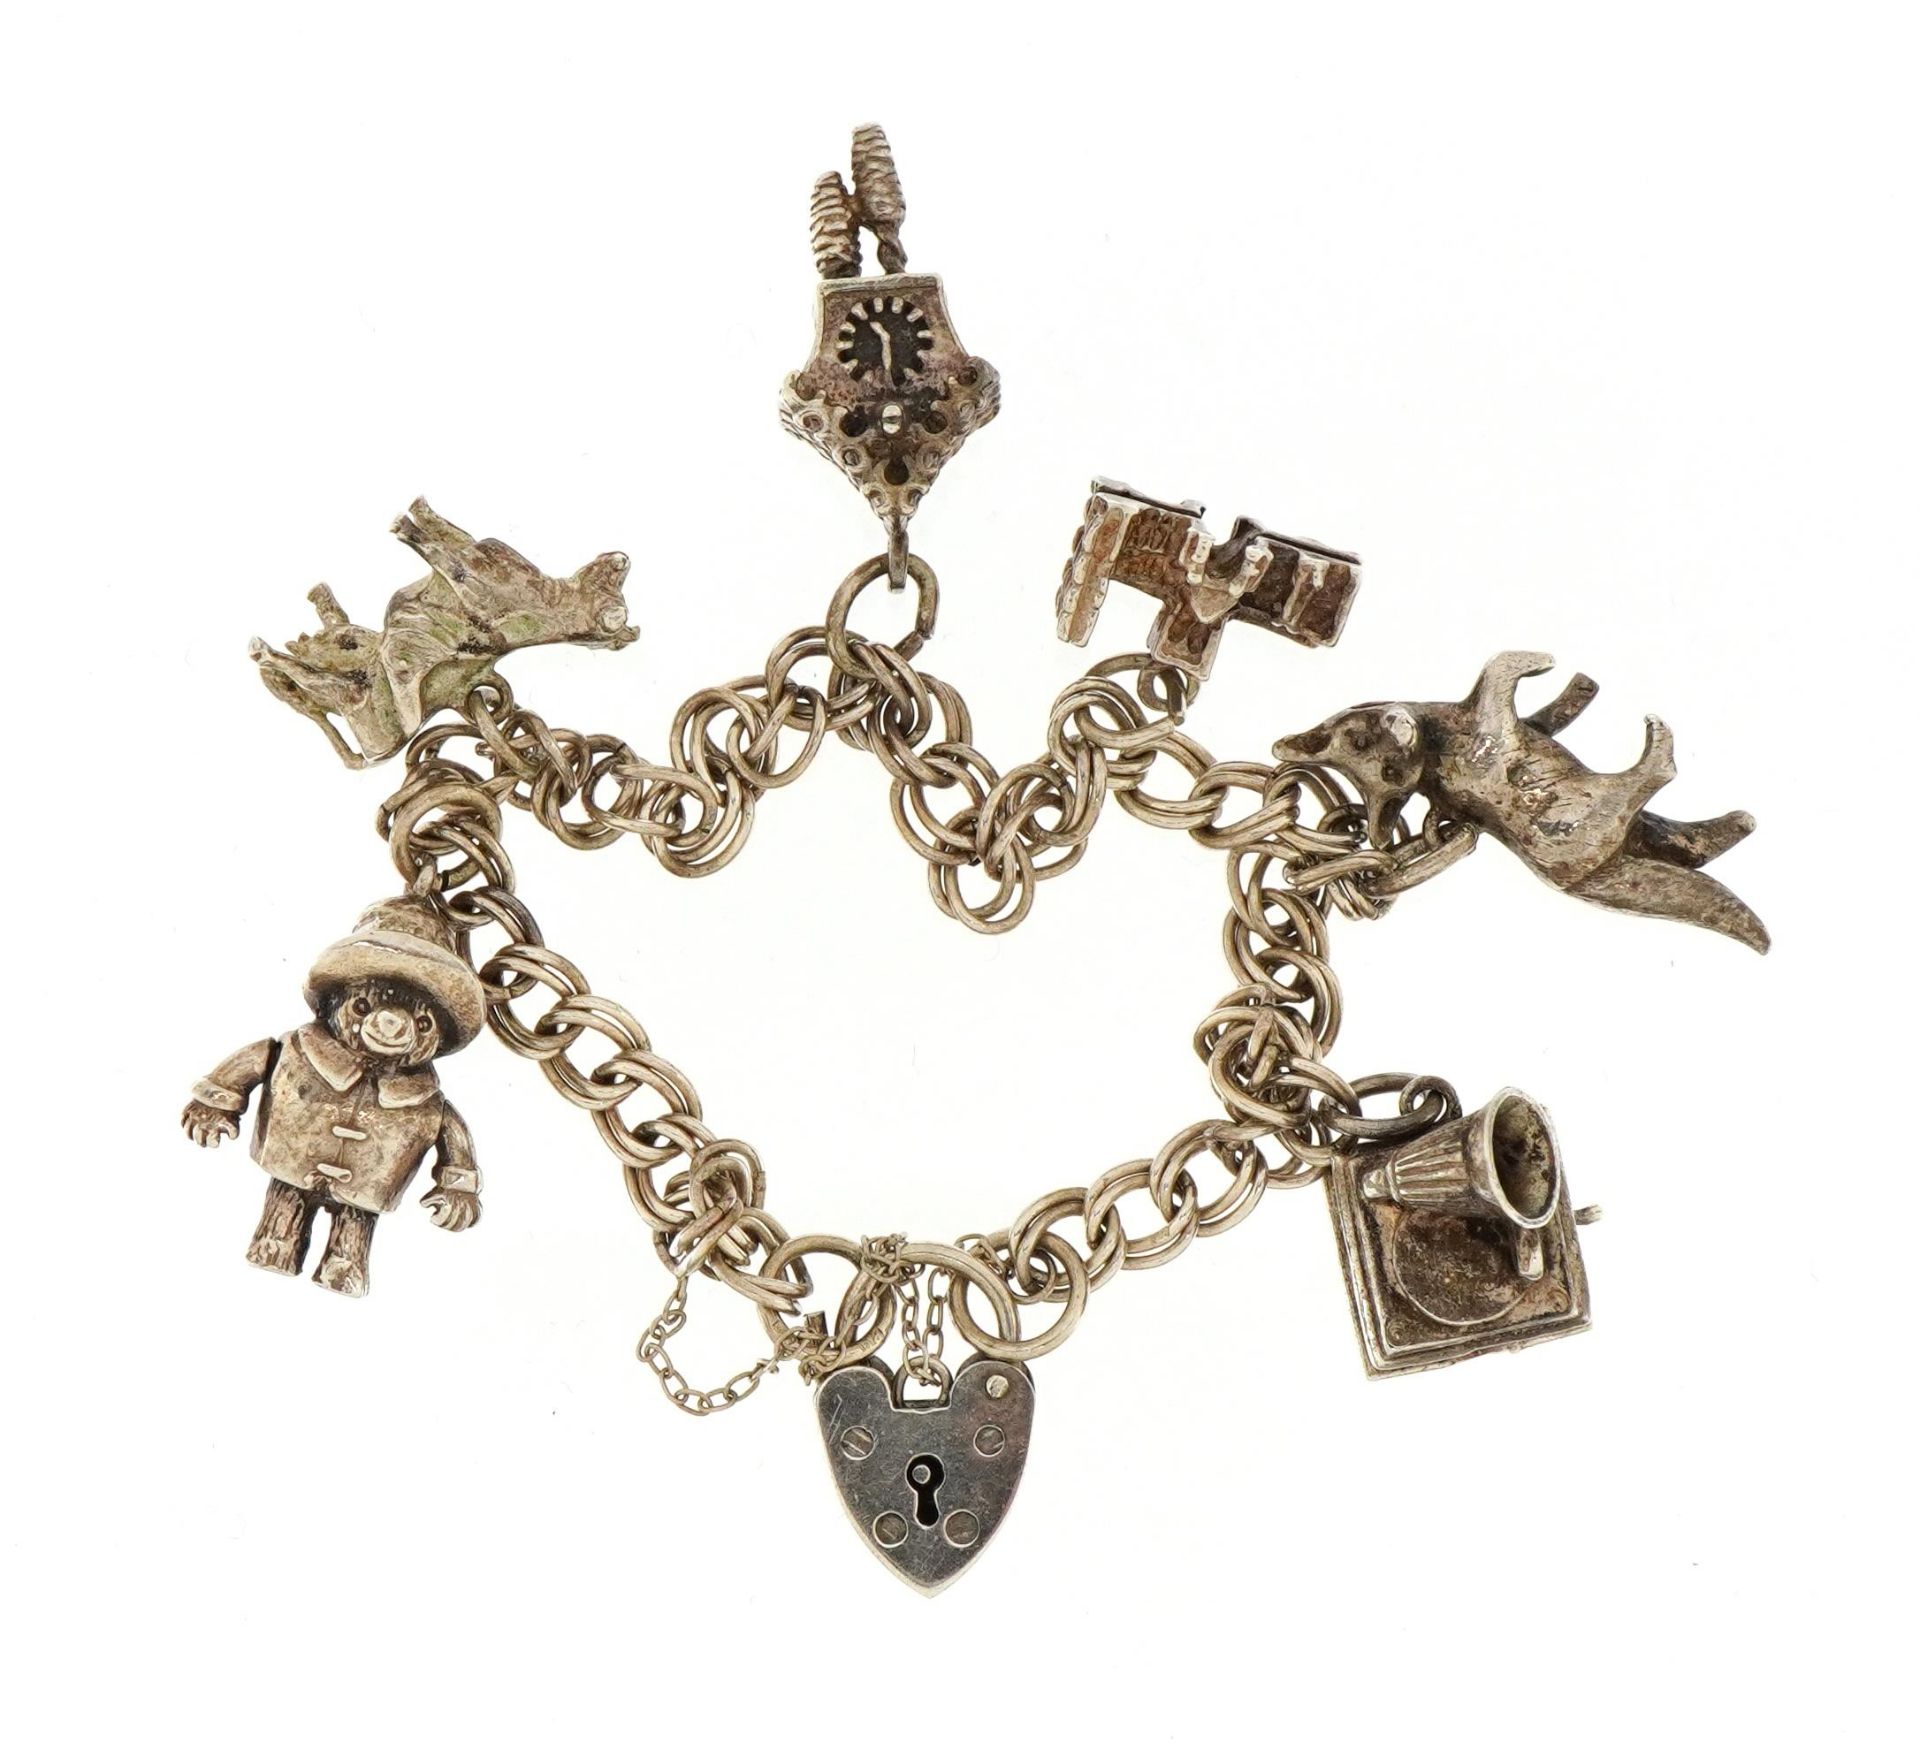 Silver charm bracelet with a selection of mostly silver charms including Paddington Bear with moving